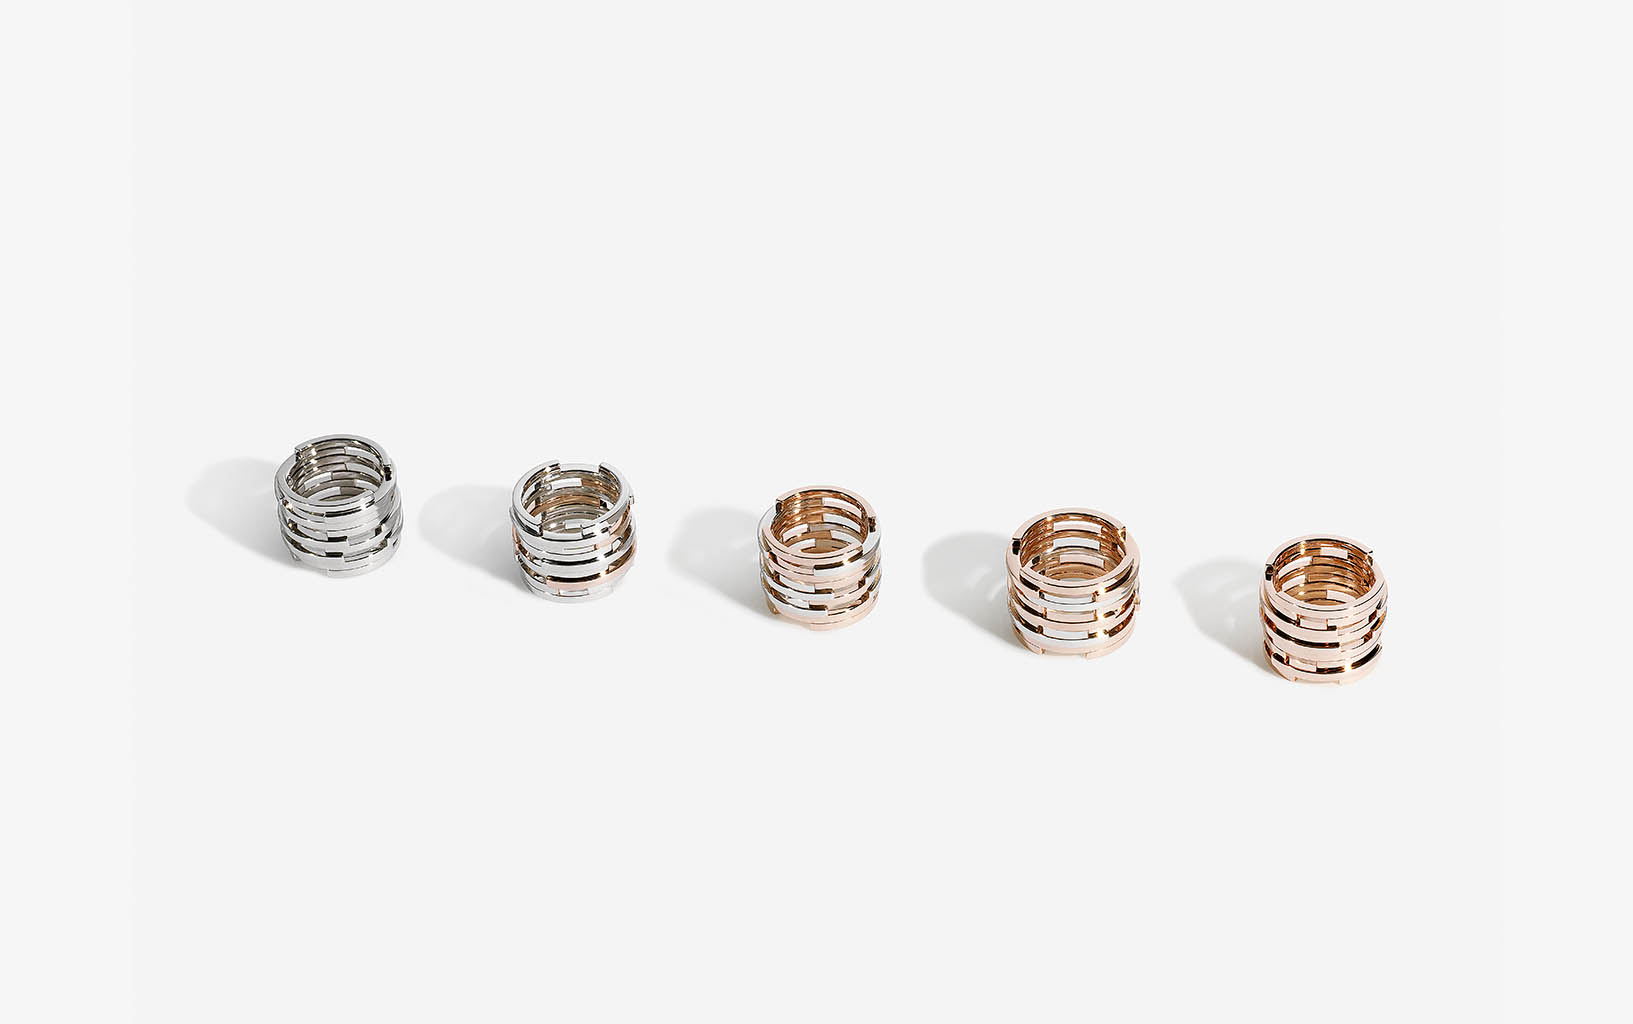 Jewellery Photography of Maison Dauphin jewllery rings by Packshot Factory